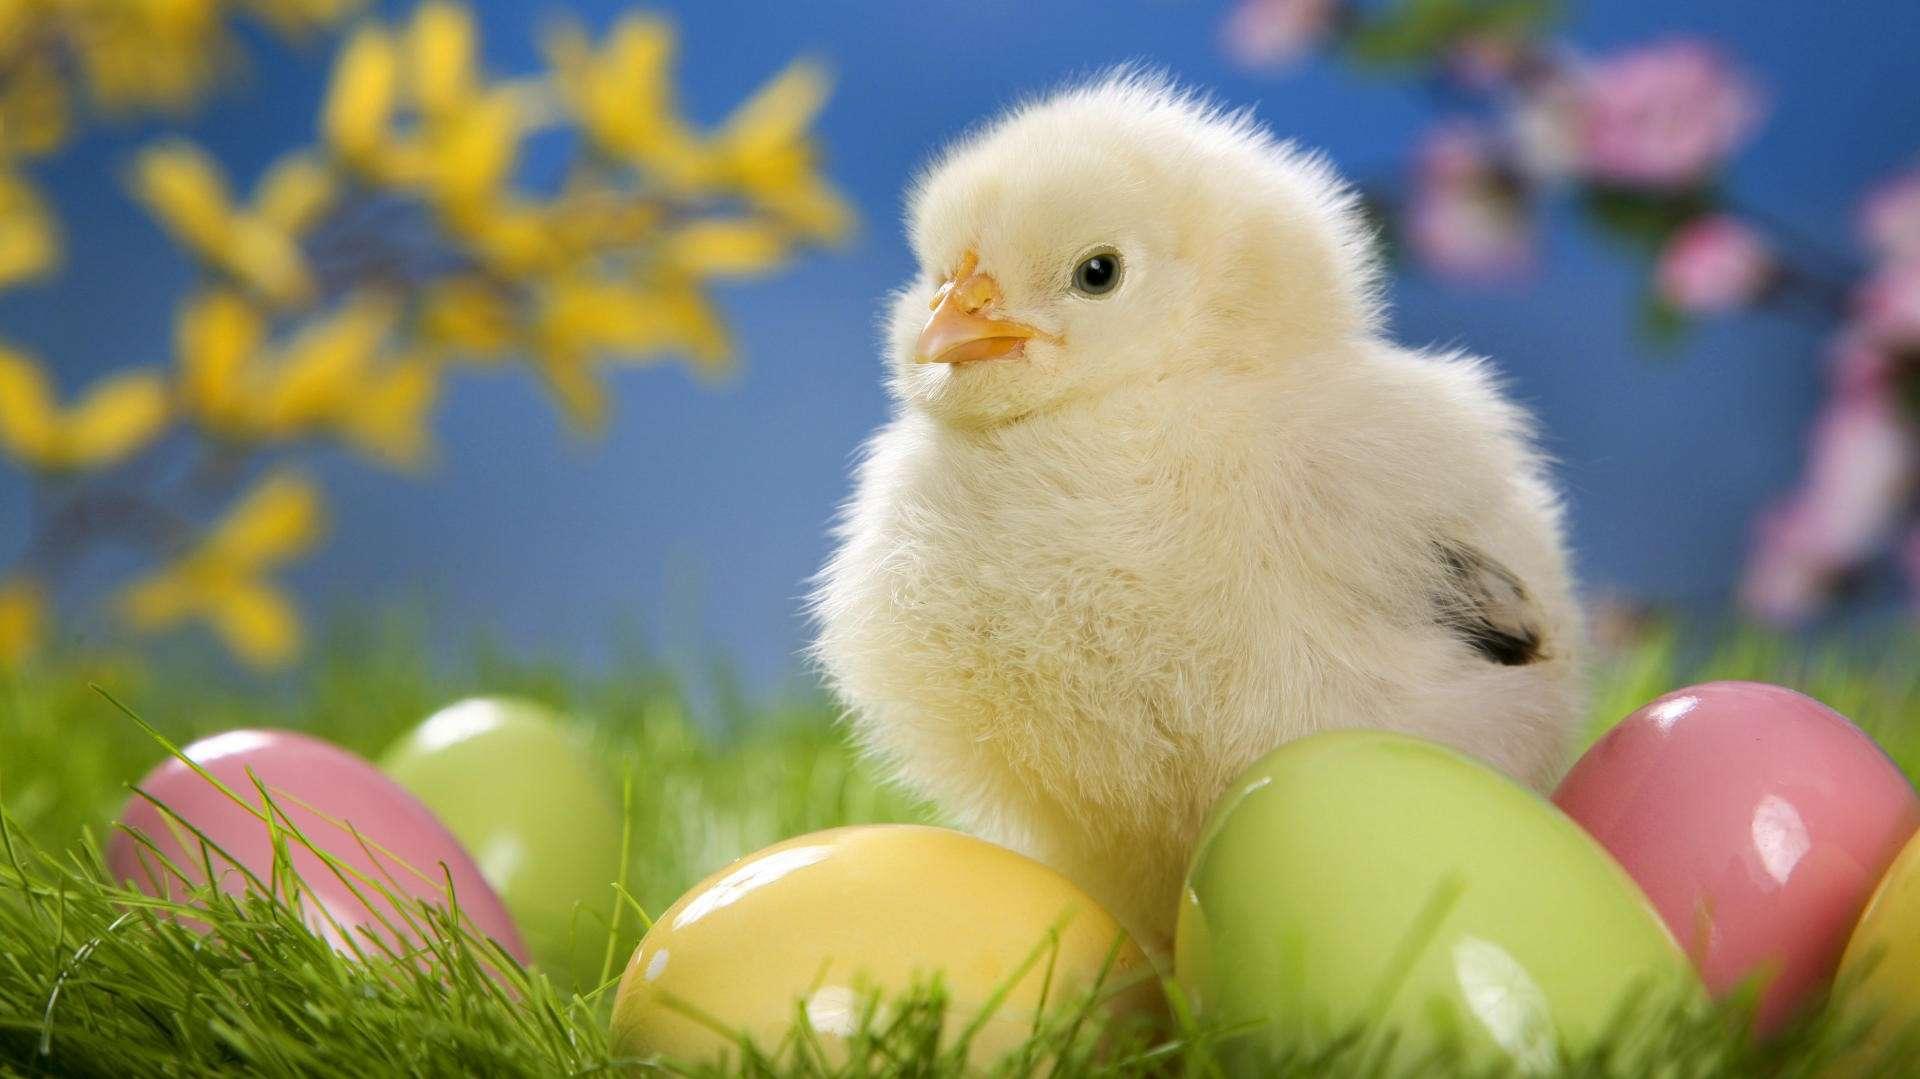 Cute Easter Chick With Eggs HD Wallpaper FullHDwpp